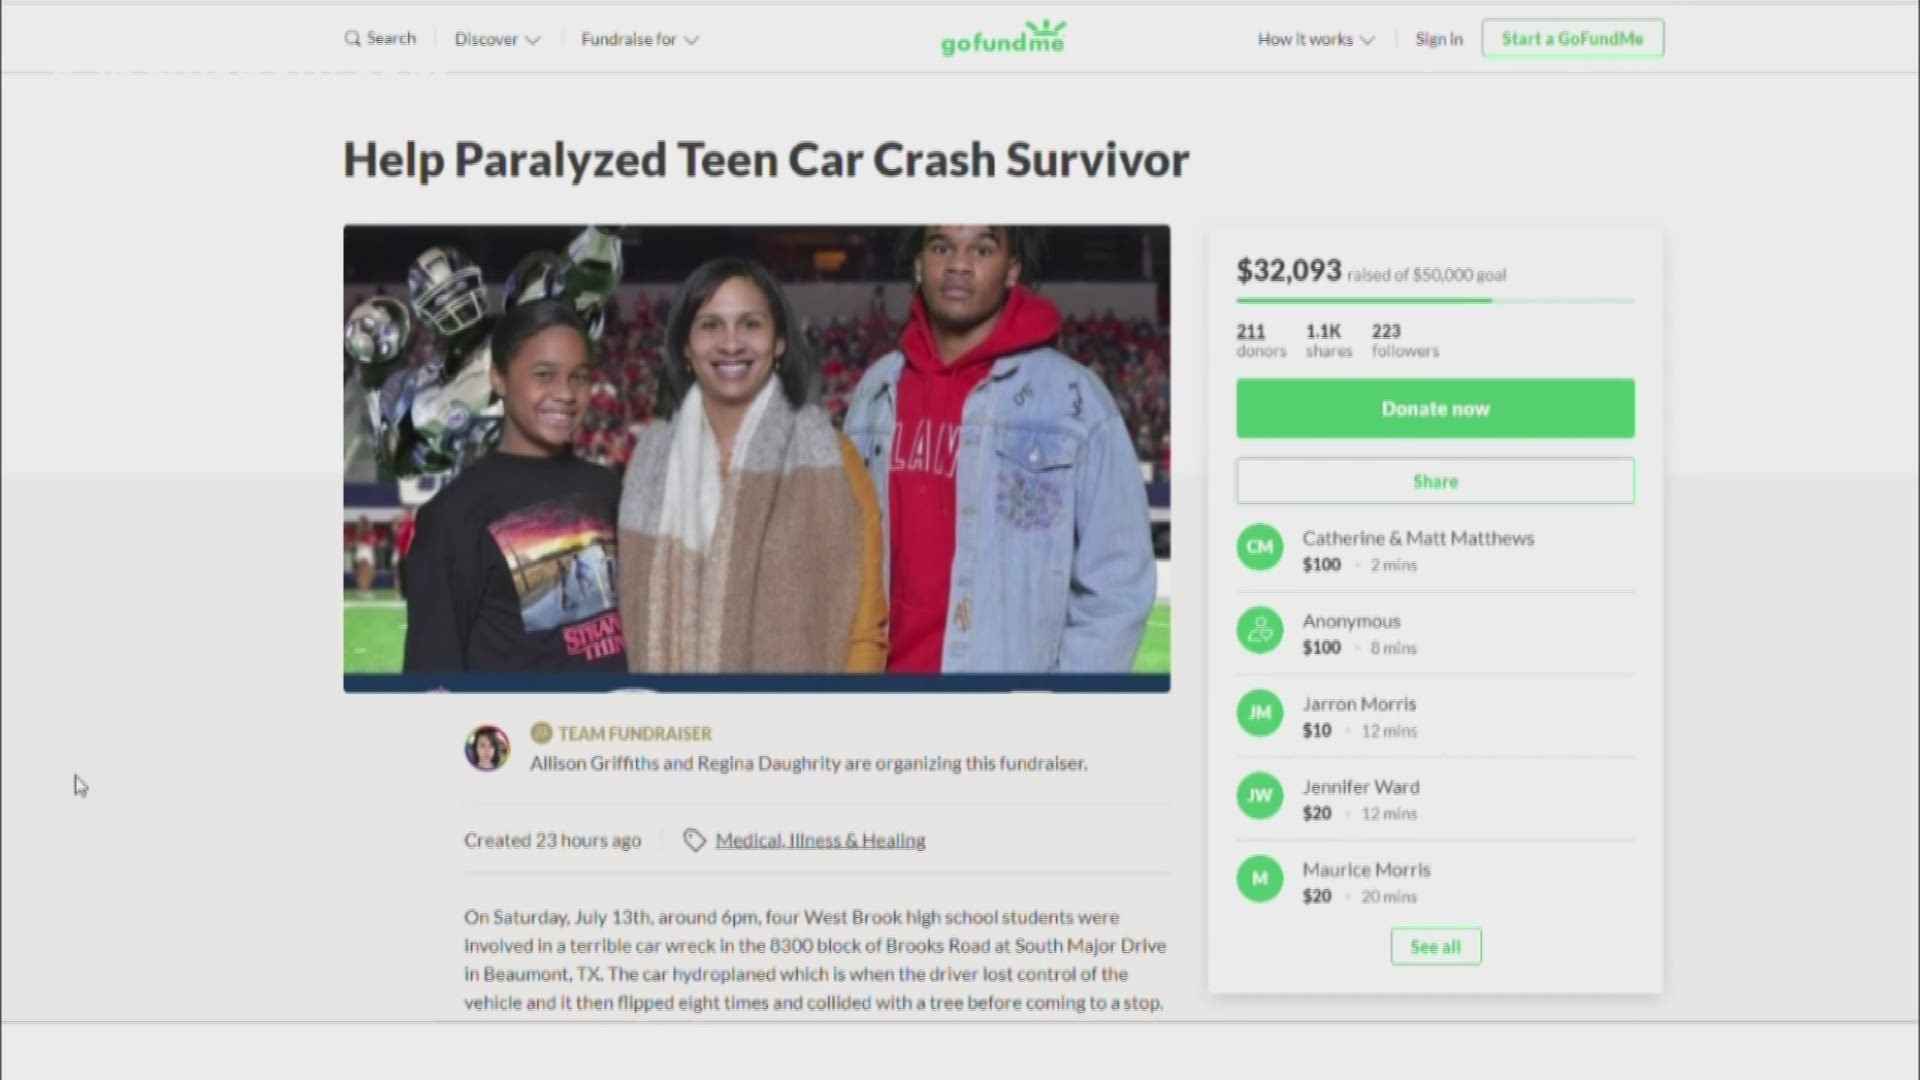 By Wednesday night, the GoFundMe had more than $38,000 in donations.